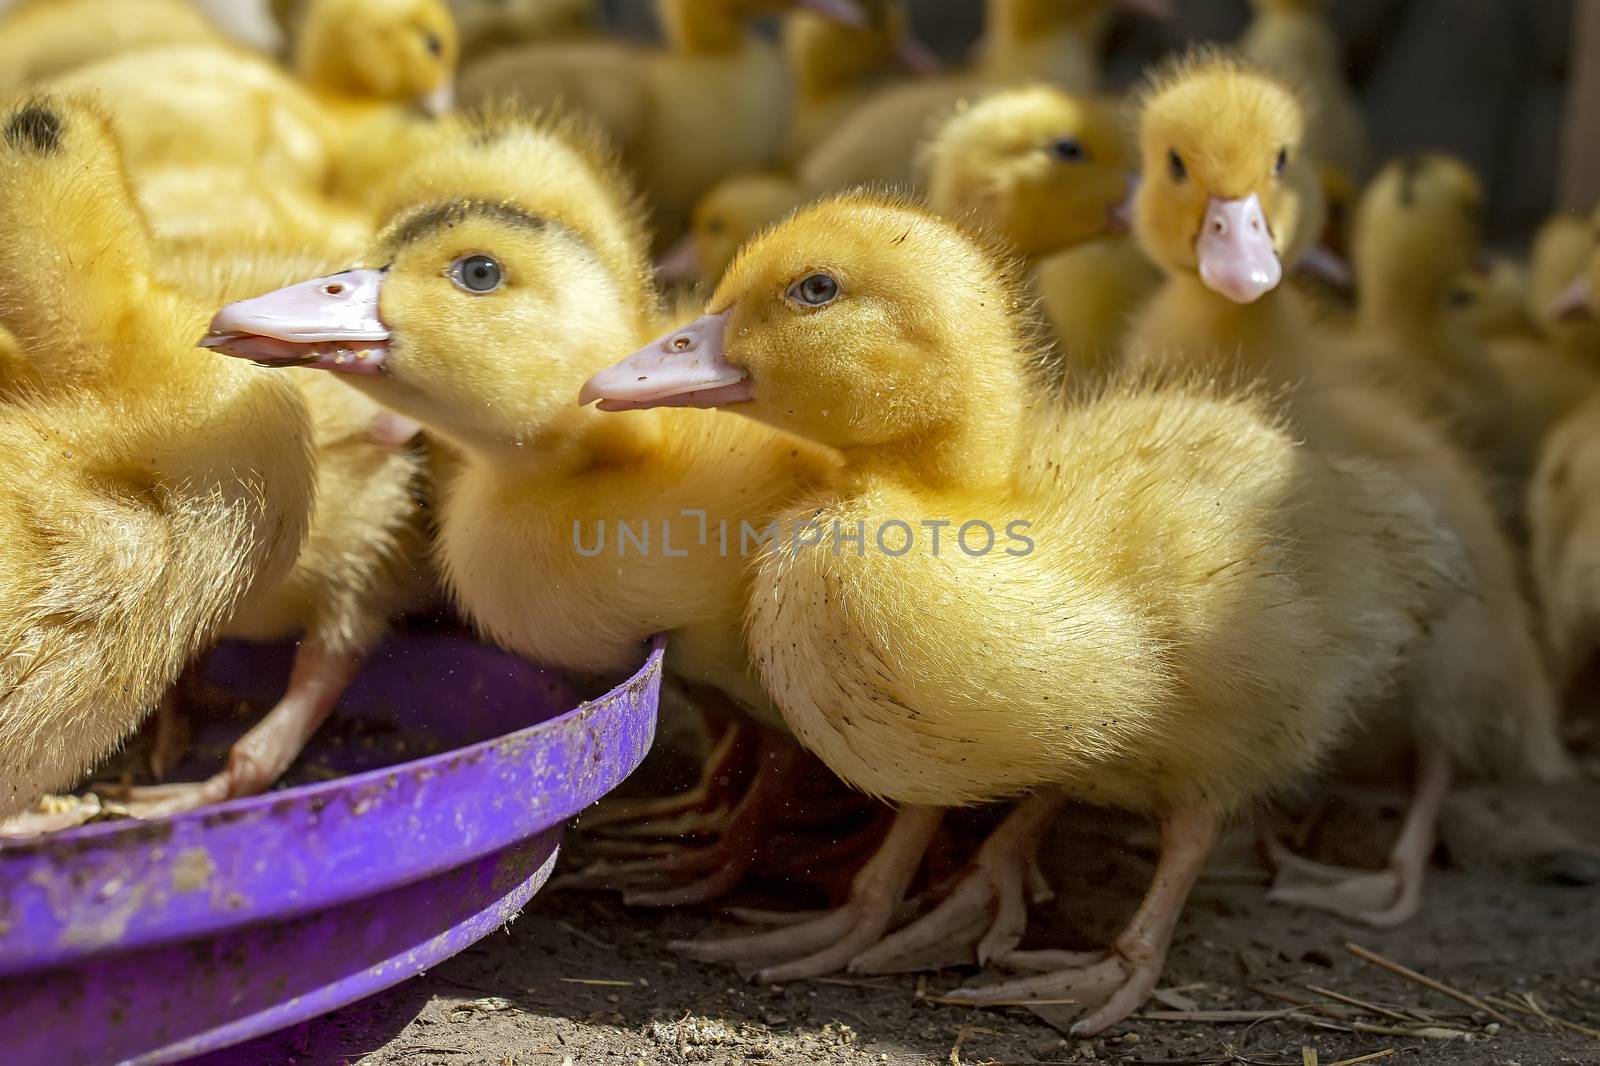 A group of ducklings. Cute beautiful yellow ducklings eat grain and walk outdoors. Young birds. Agriculture, poultry. Household. Growing poultry at home.